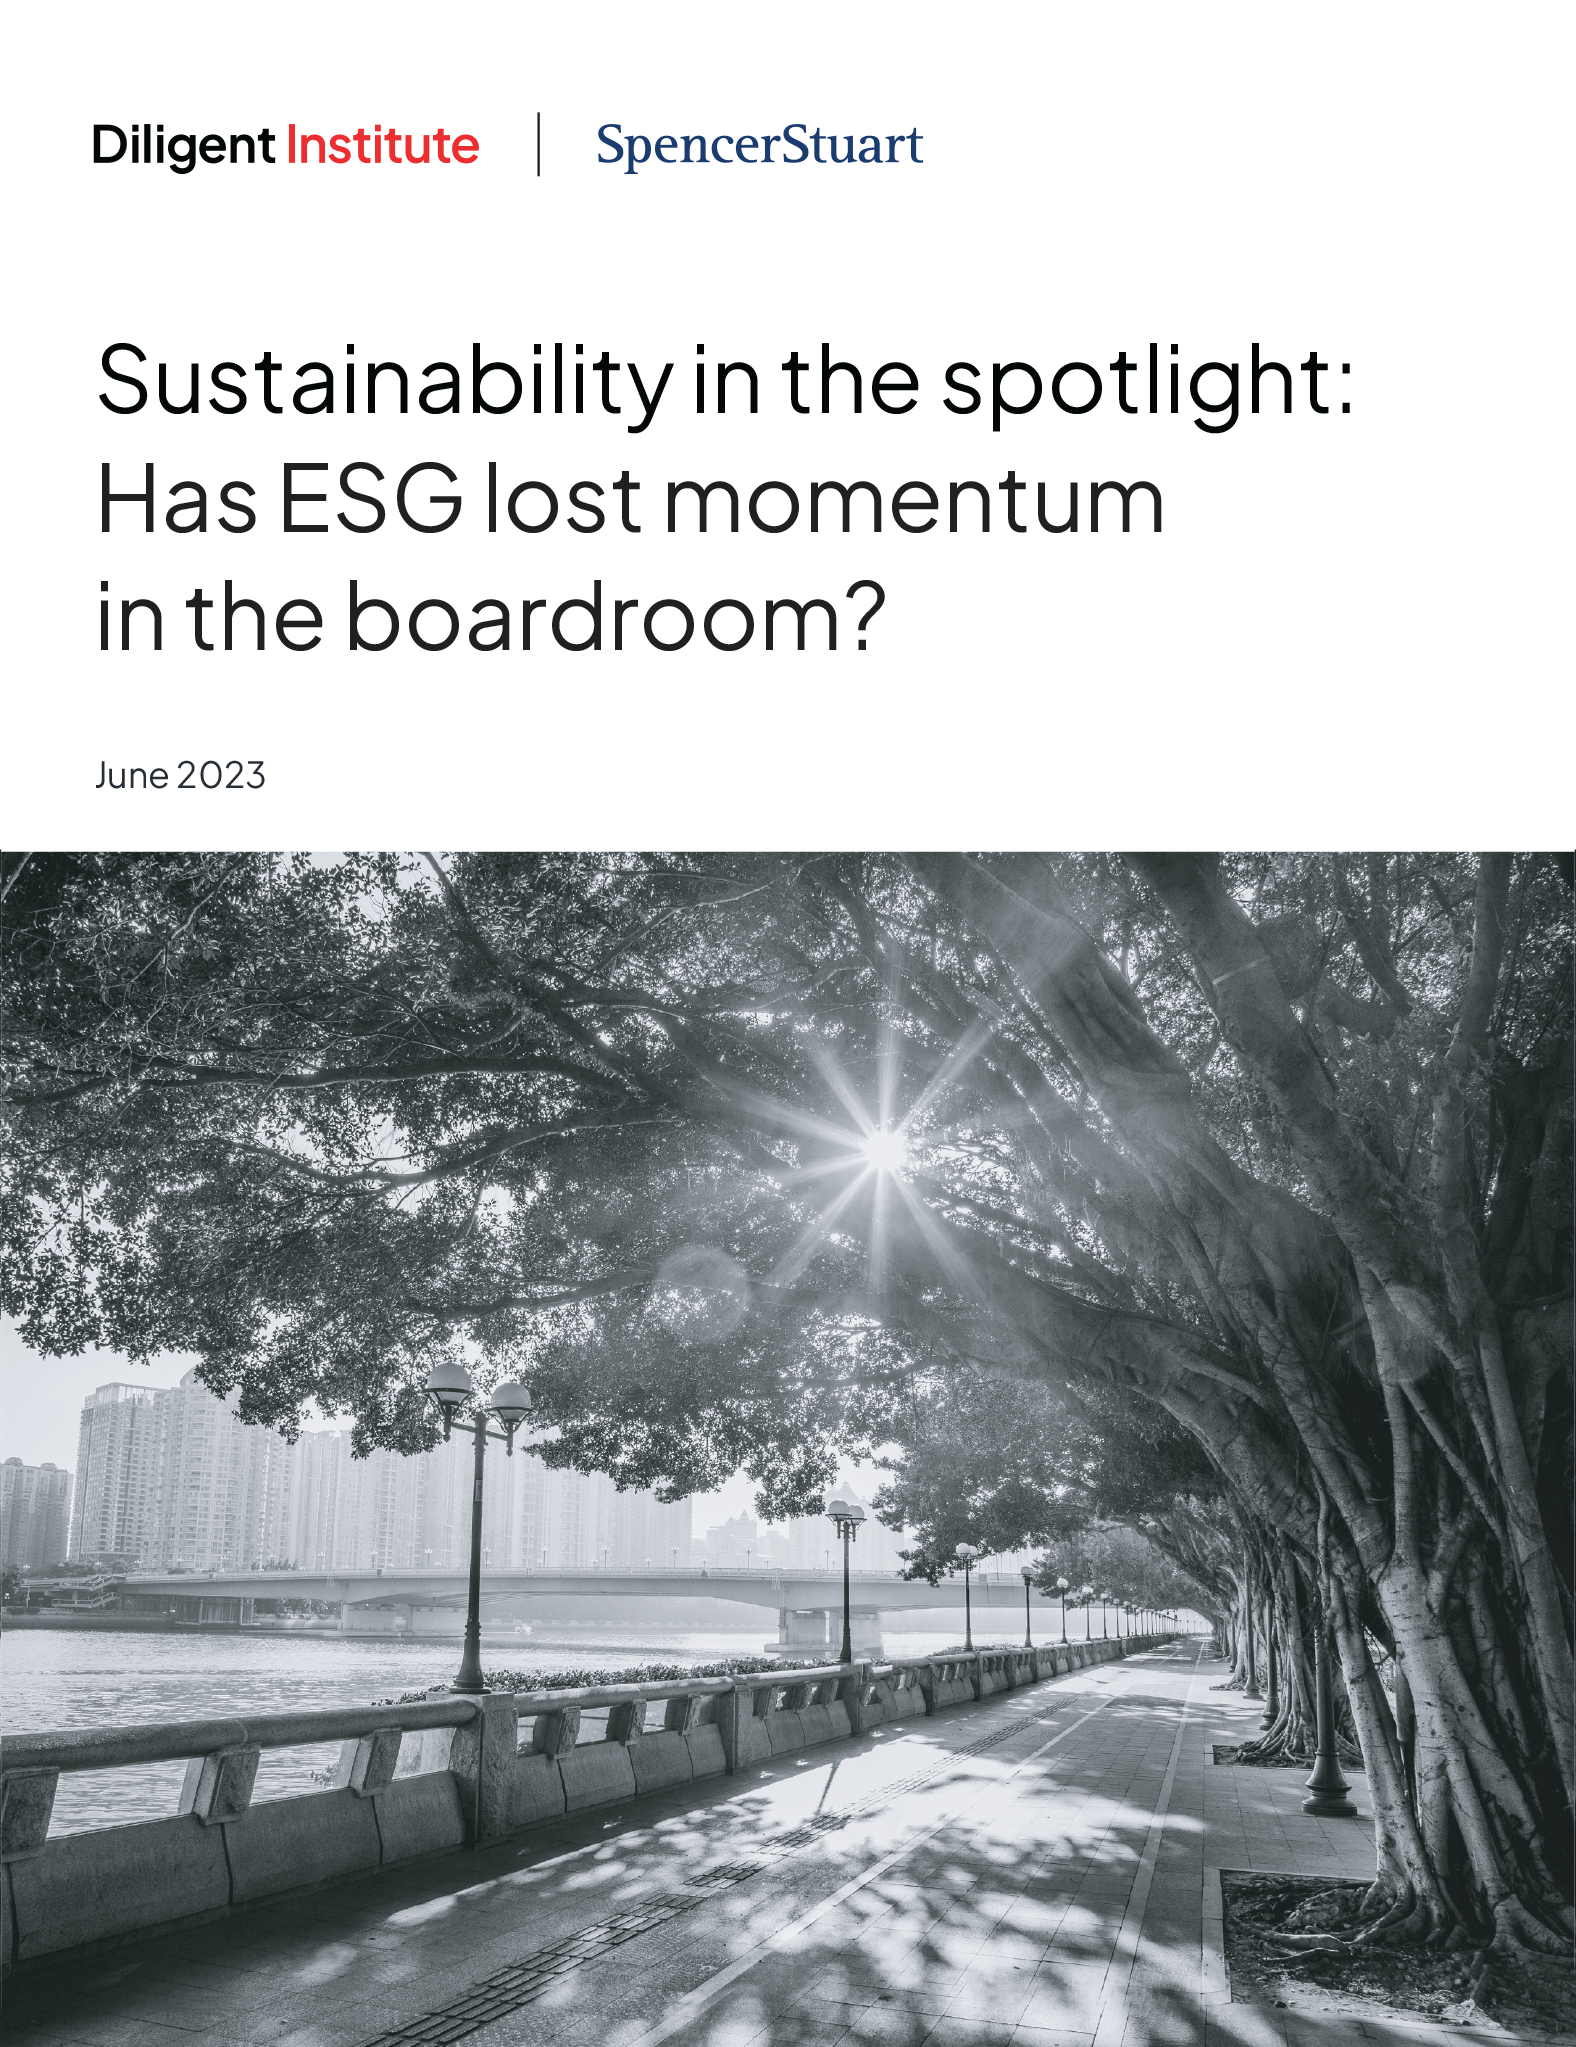 Sustainability in the spotlight: Has ESG lost momentum in the boardroom report